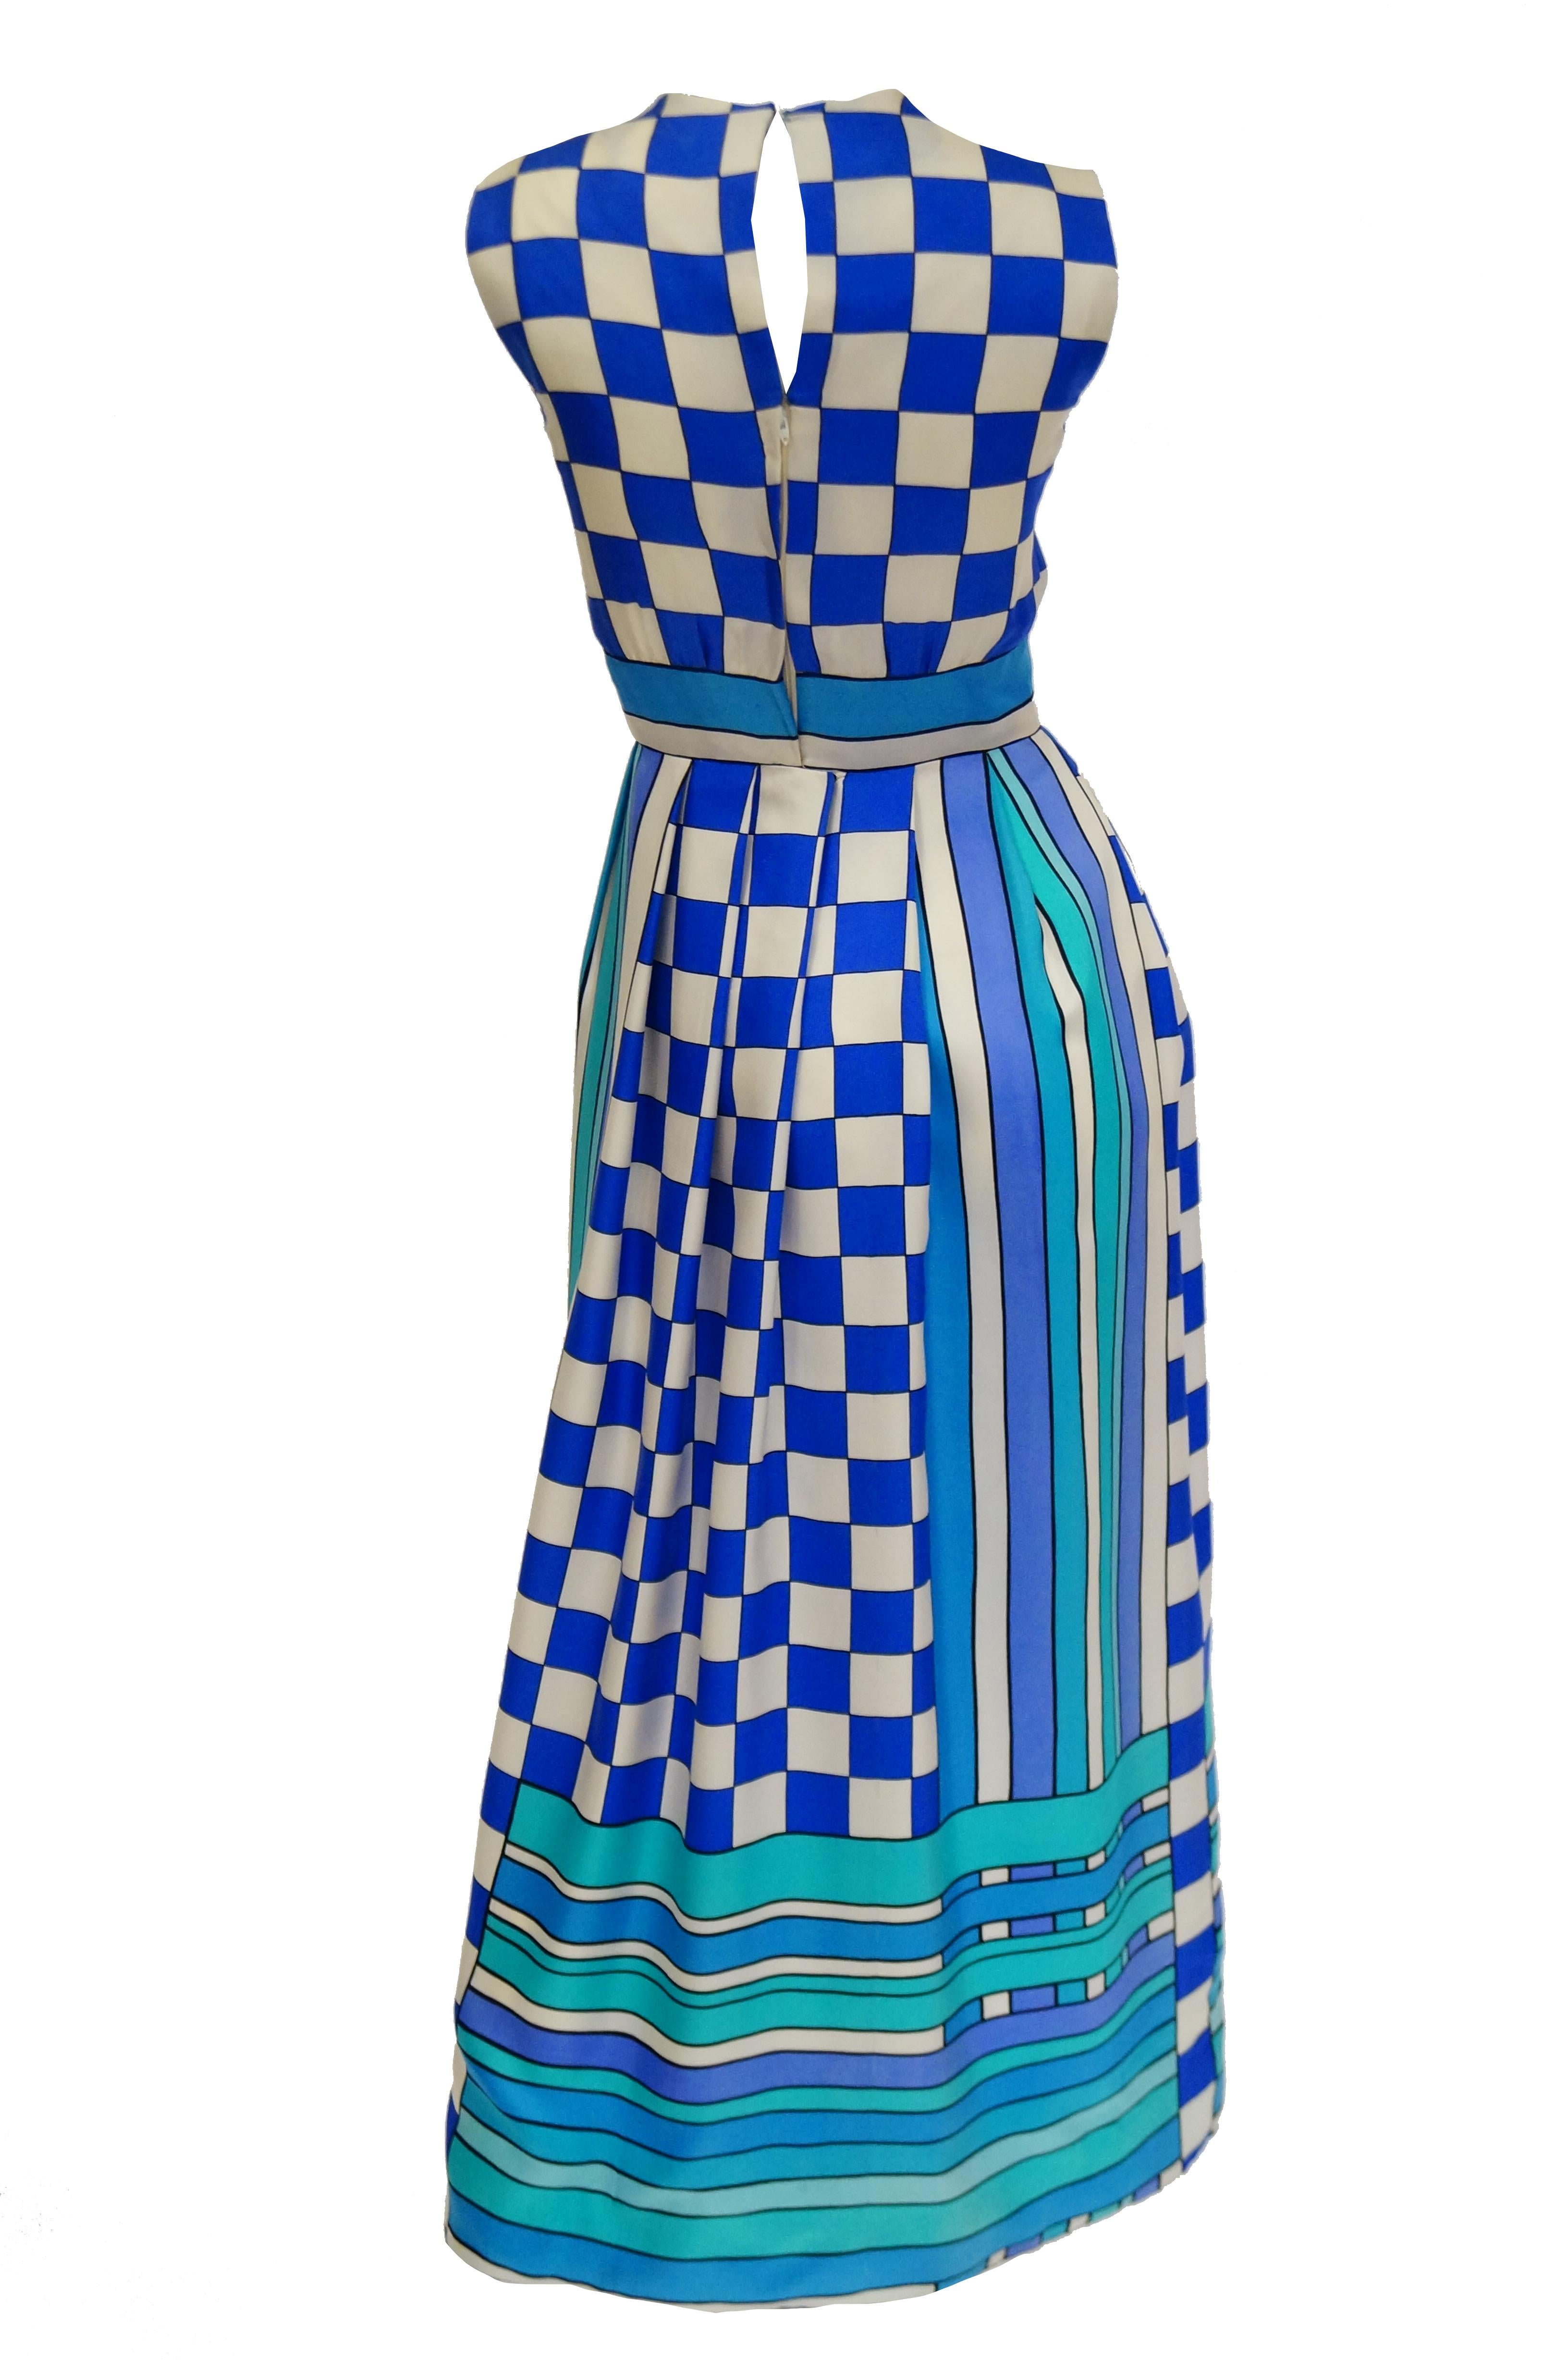 1960s Tina Leser Blue Checkerboard Print Dress with Graphic Blue Hem For Sale 2